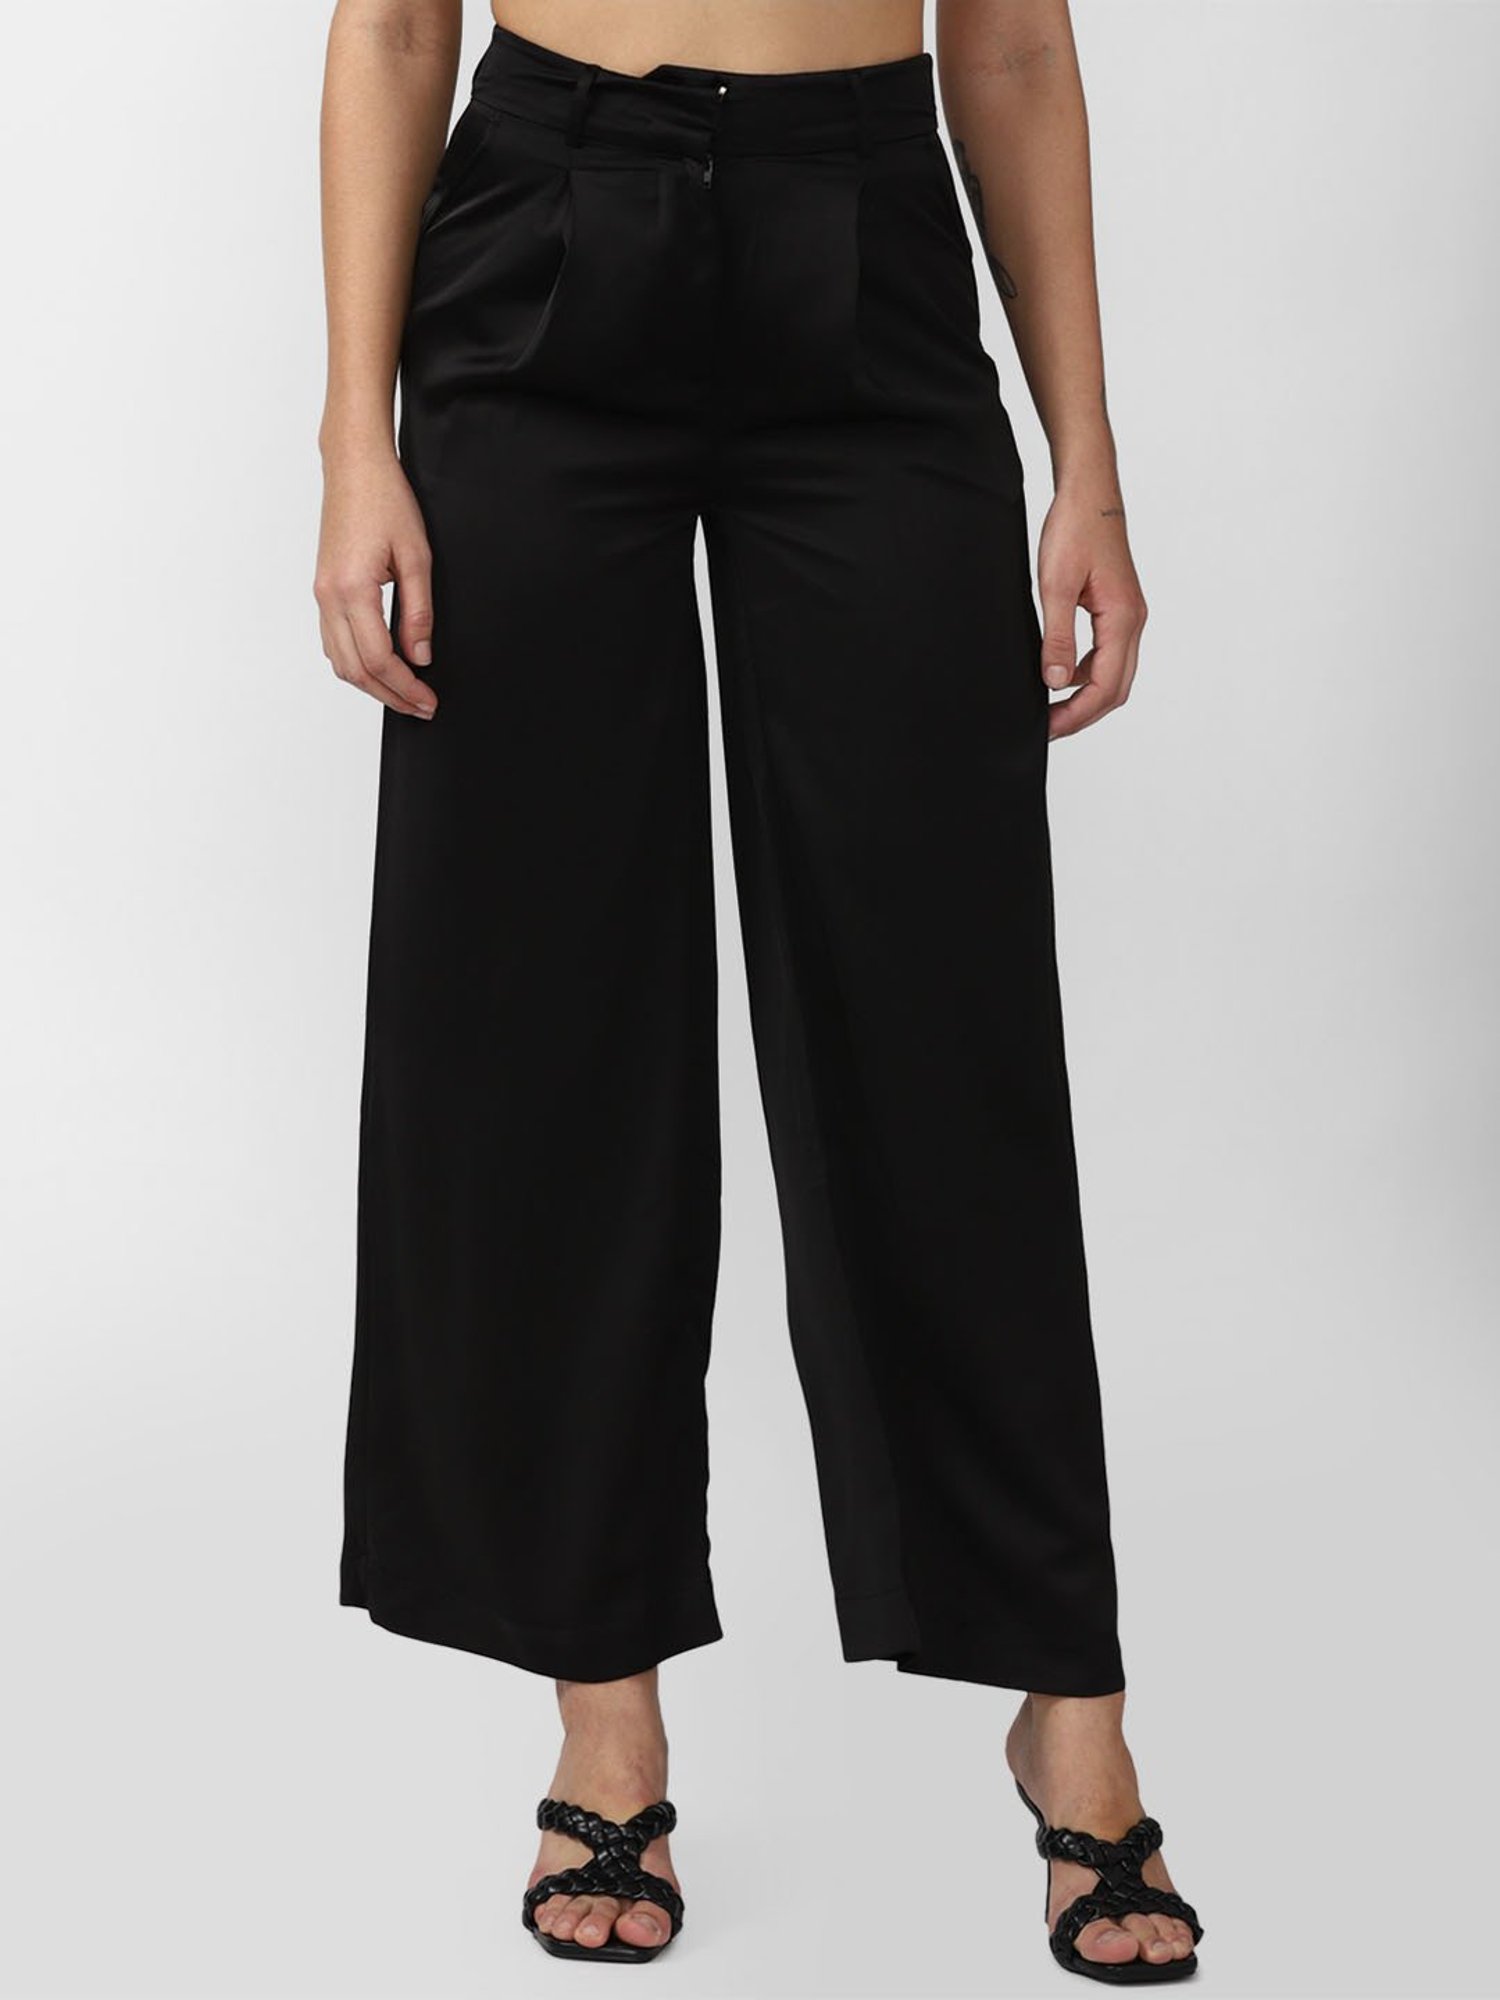 Shop HighRise WideLeg Pants for Women from latest collection at Forever 21   324100